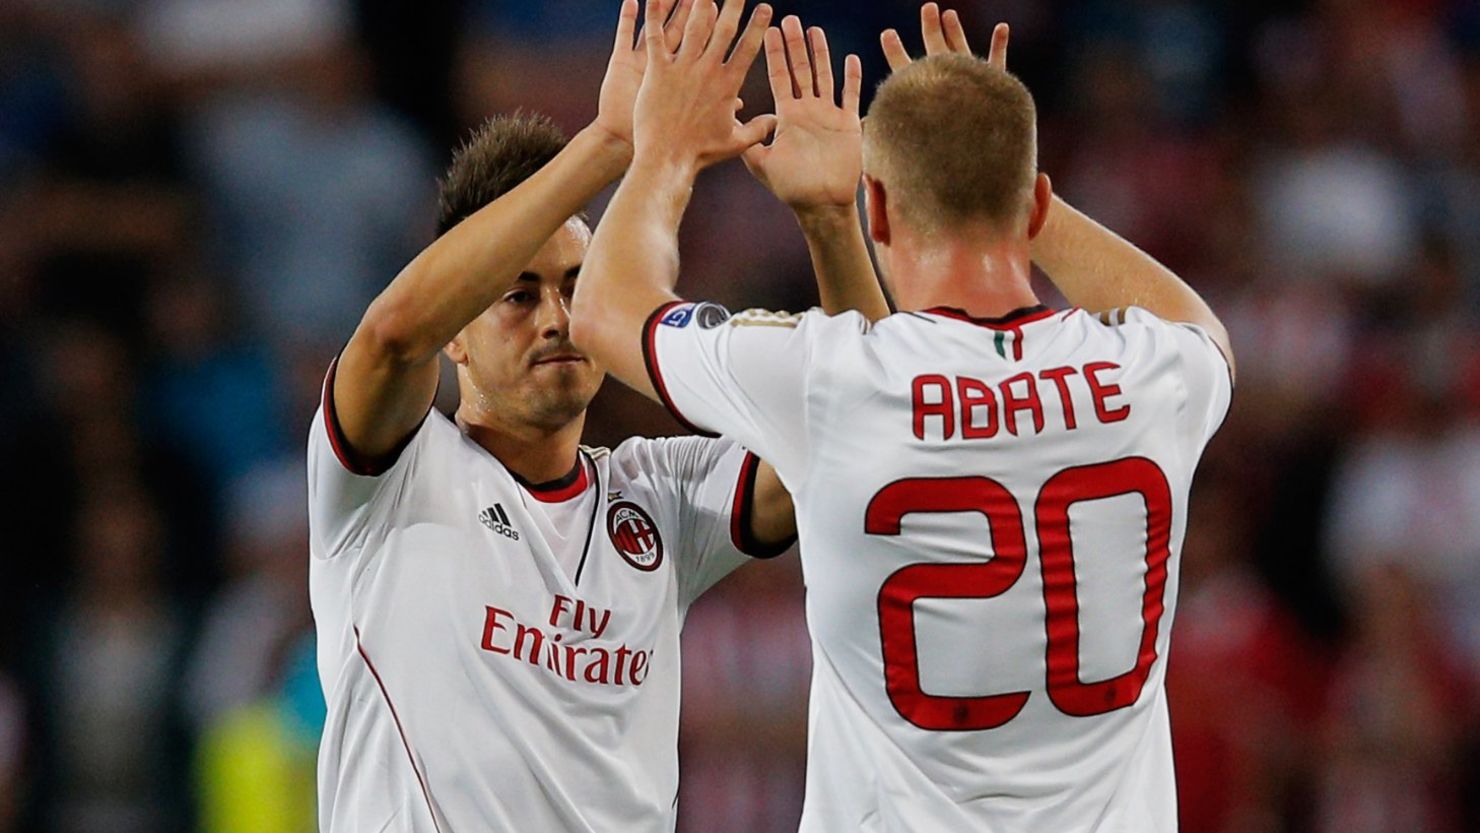 Stephan El Shaarawy celebrates scoring the crucial first goal for Milan teammate Ignazio Abate in the tie against PSV Eindhoven. 